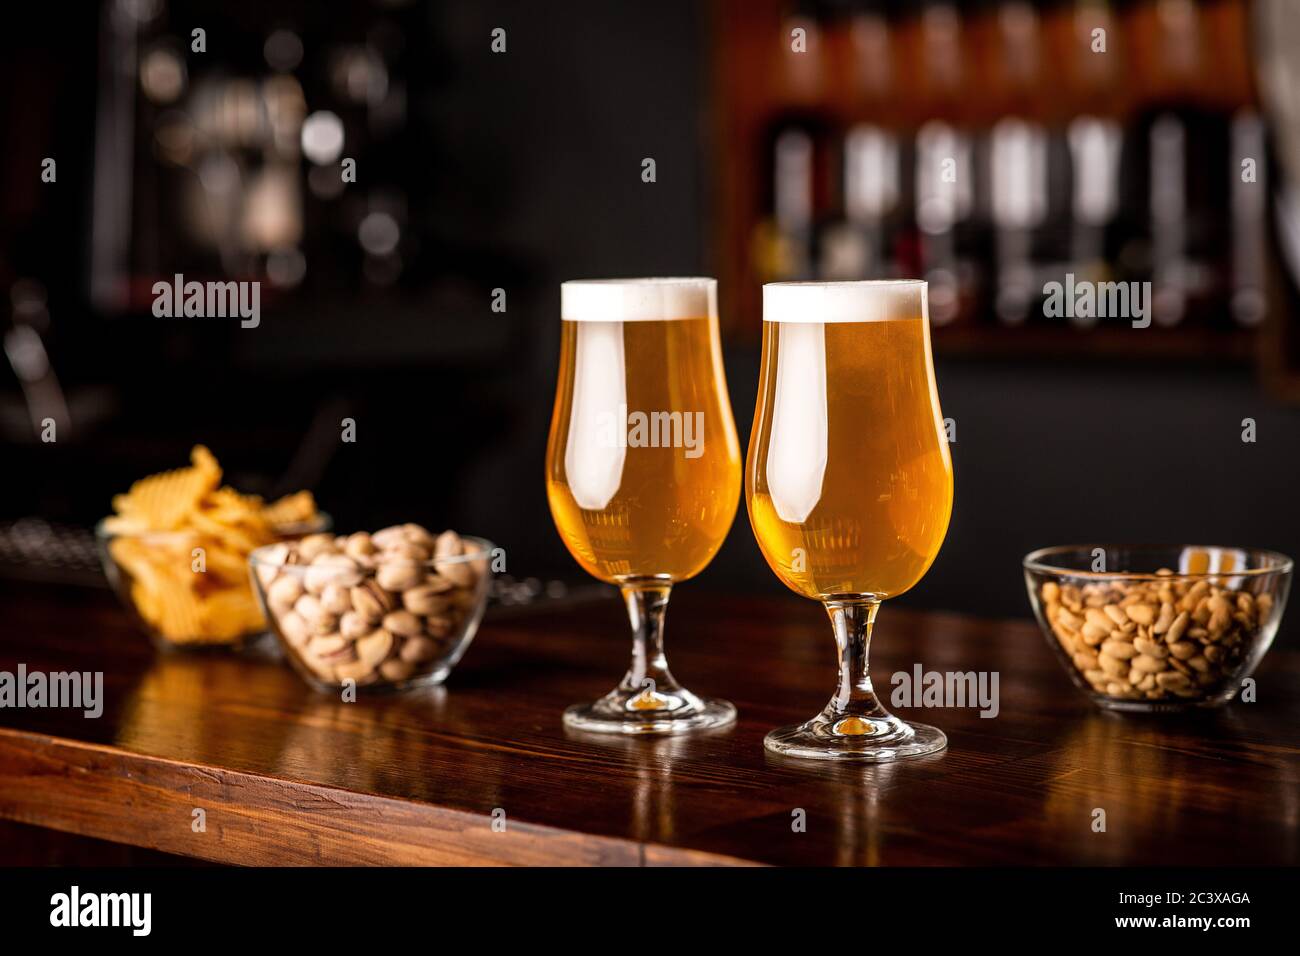 Snacks in pub on wooden bar. Two glasses with beer, chips, nuts and pistachios Stock Photo